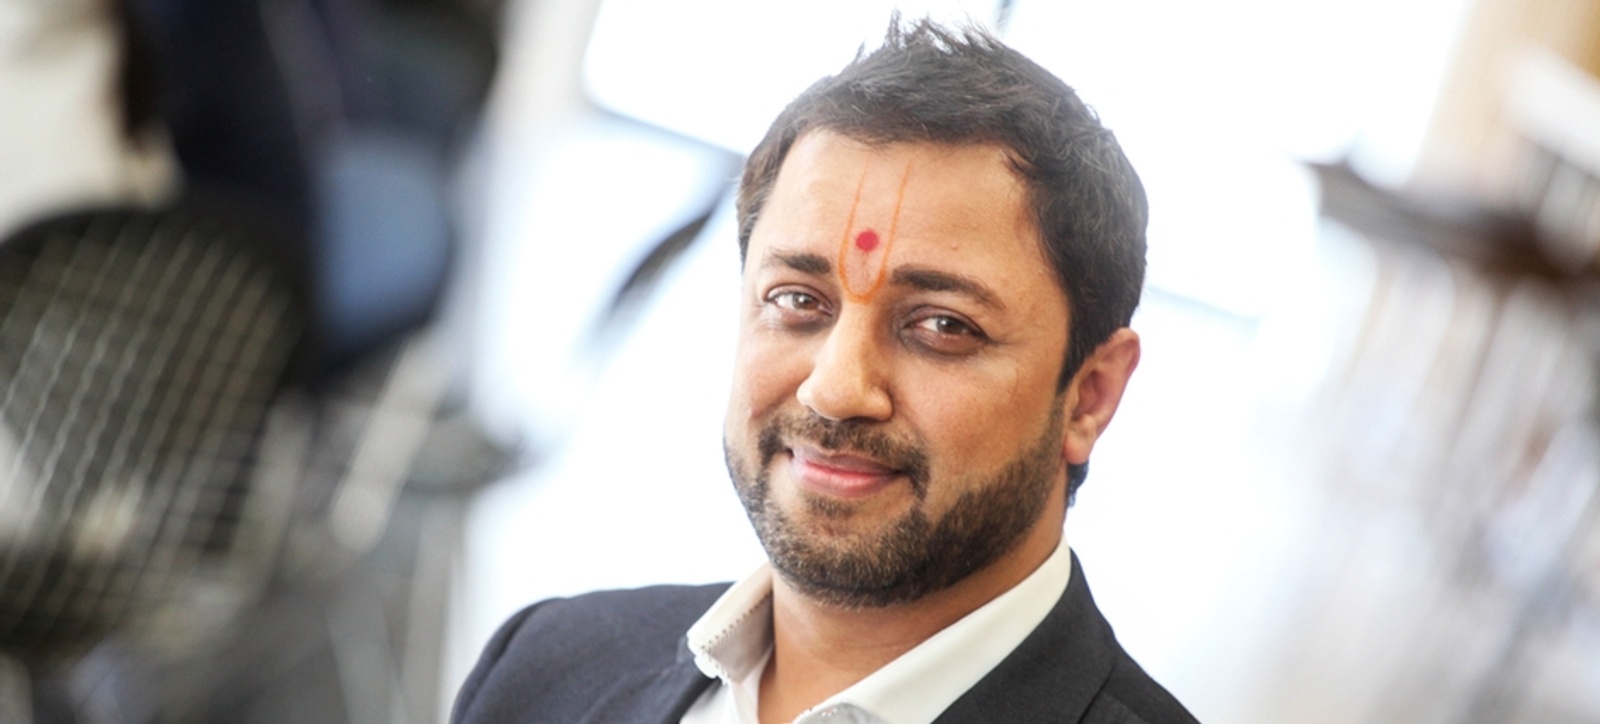 Sanjiv Patel was named Influential Leaders and the British Asian Awards